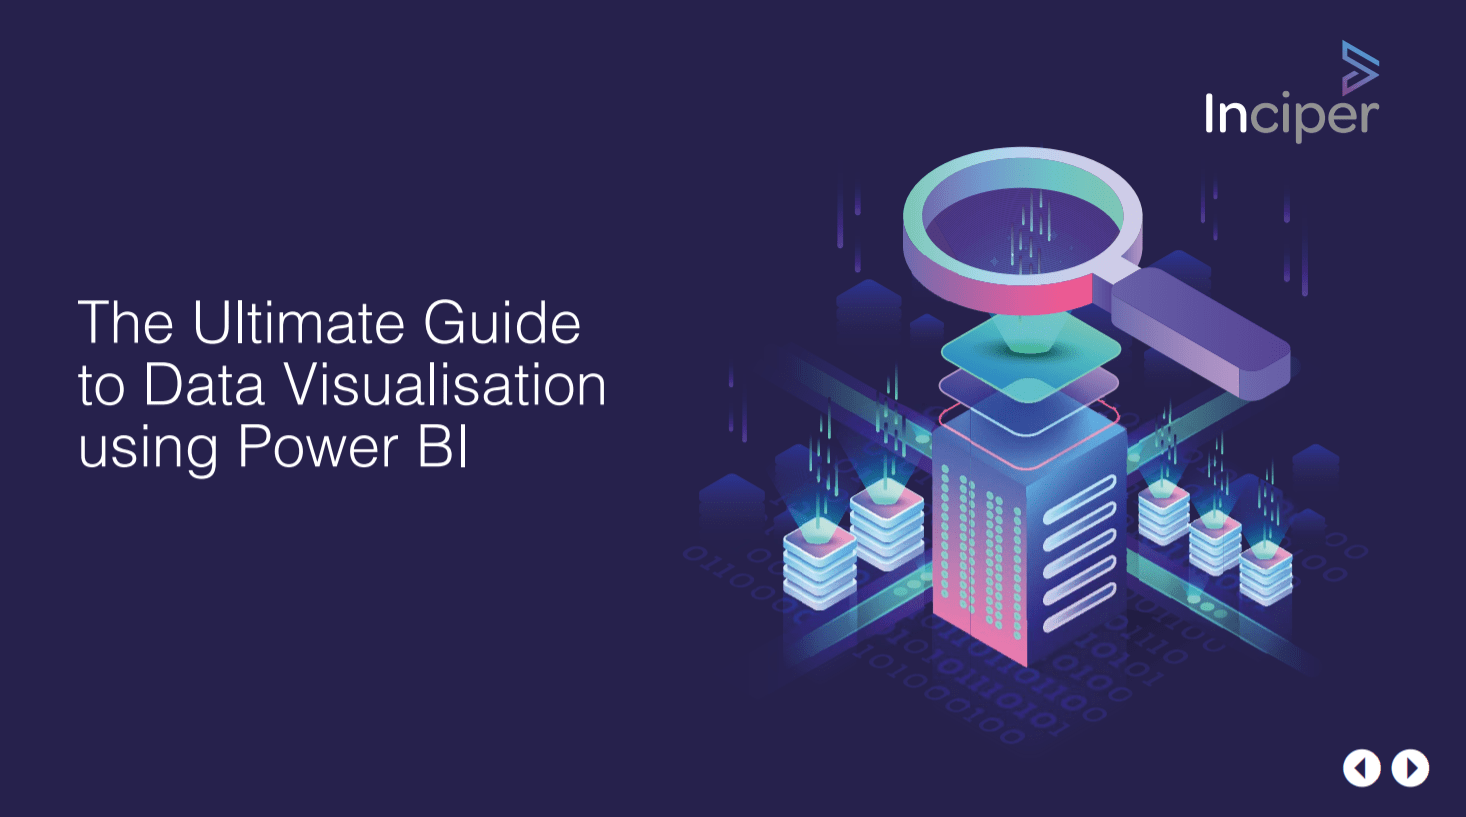 The Ultimate Guide to Data Visualisation using Power BI